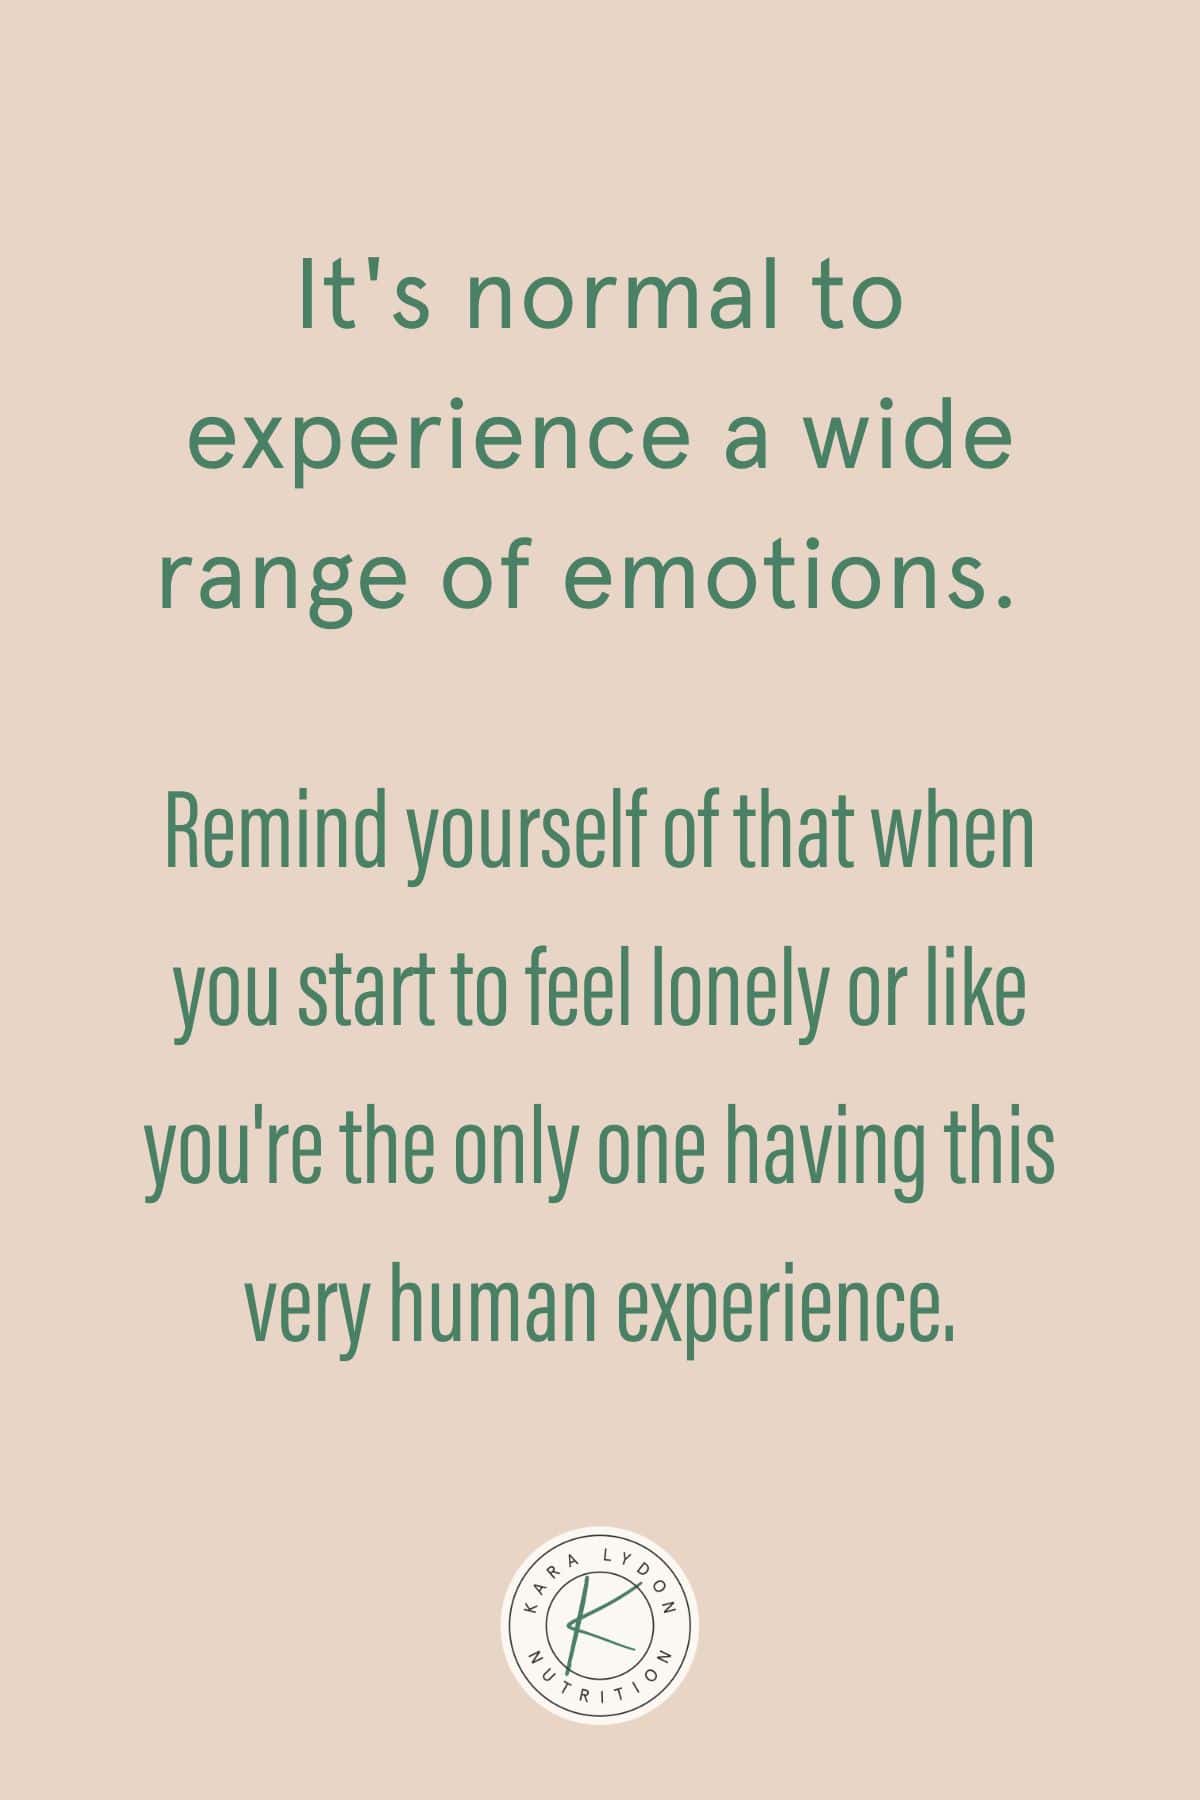 graphic with quote: "It's normal to experience a wide range of emotions.  Remember this when you start to feel lonely or like you are the only one having this very human experience."